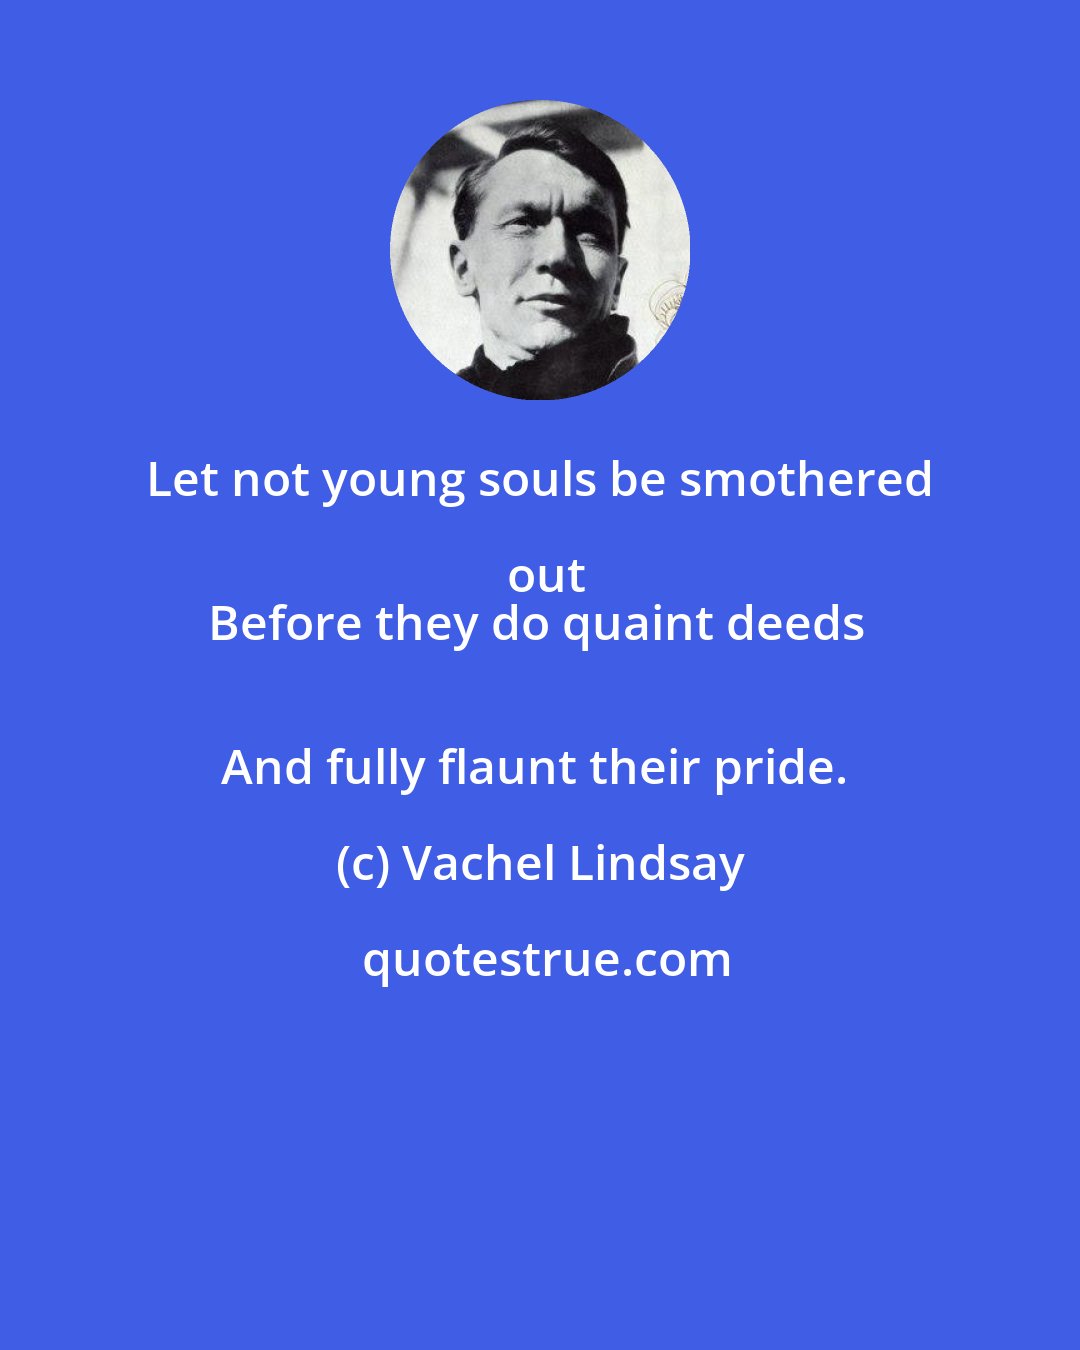 Vachel Lindsay: Let not young souls be smothered out
Before they do quaint deeds 
And fully flaunt their pride.